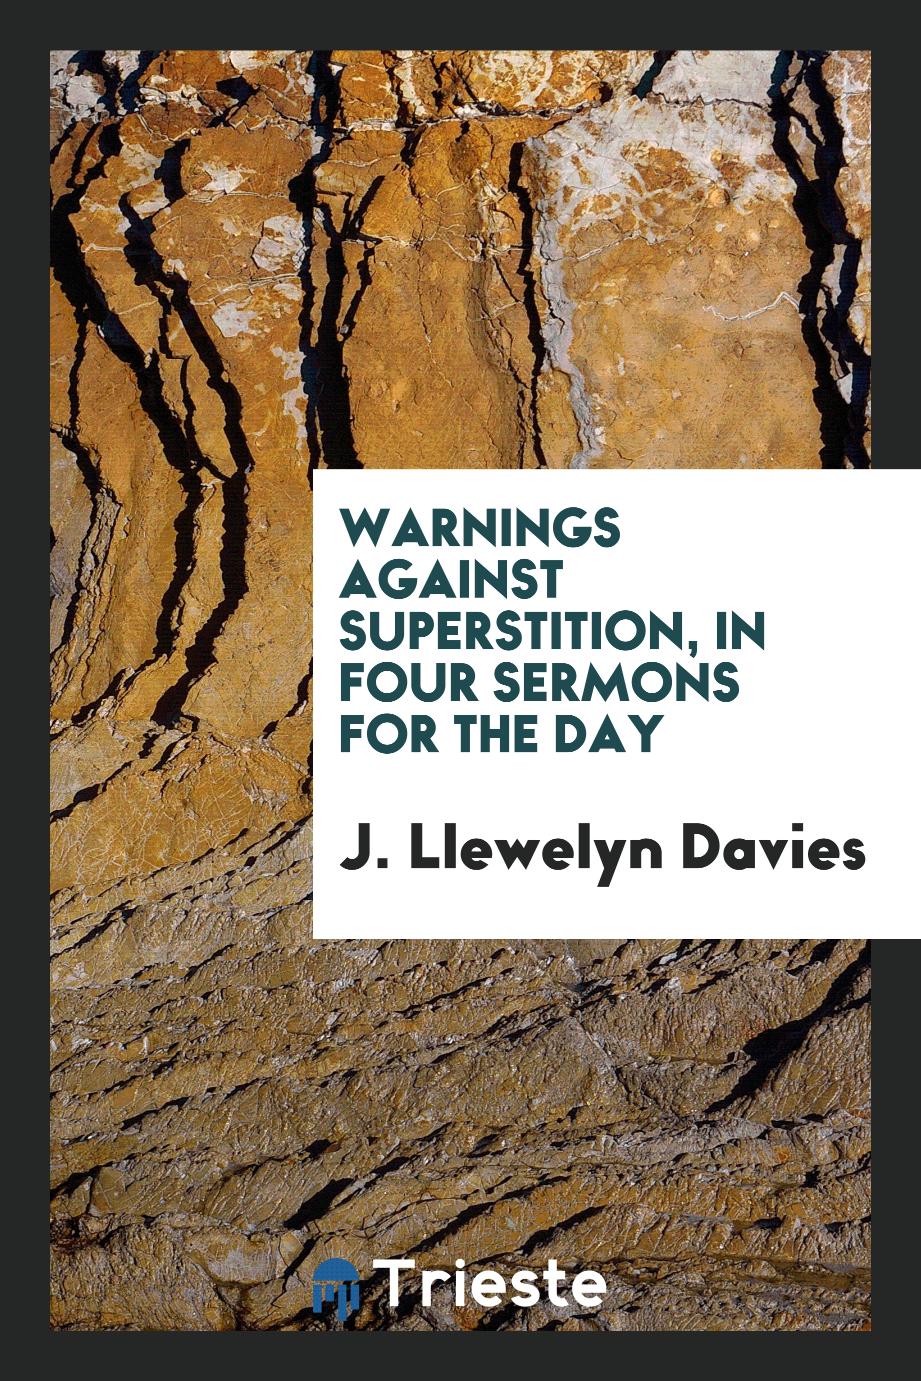 Warnings against Superstition, in Four Sermons for the Day